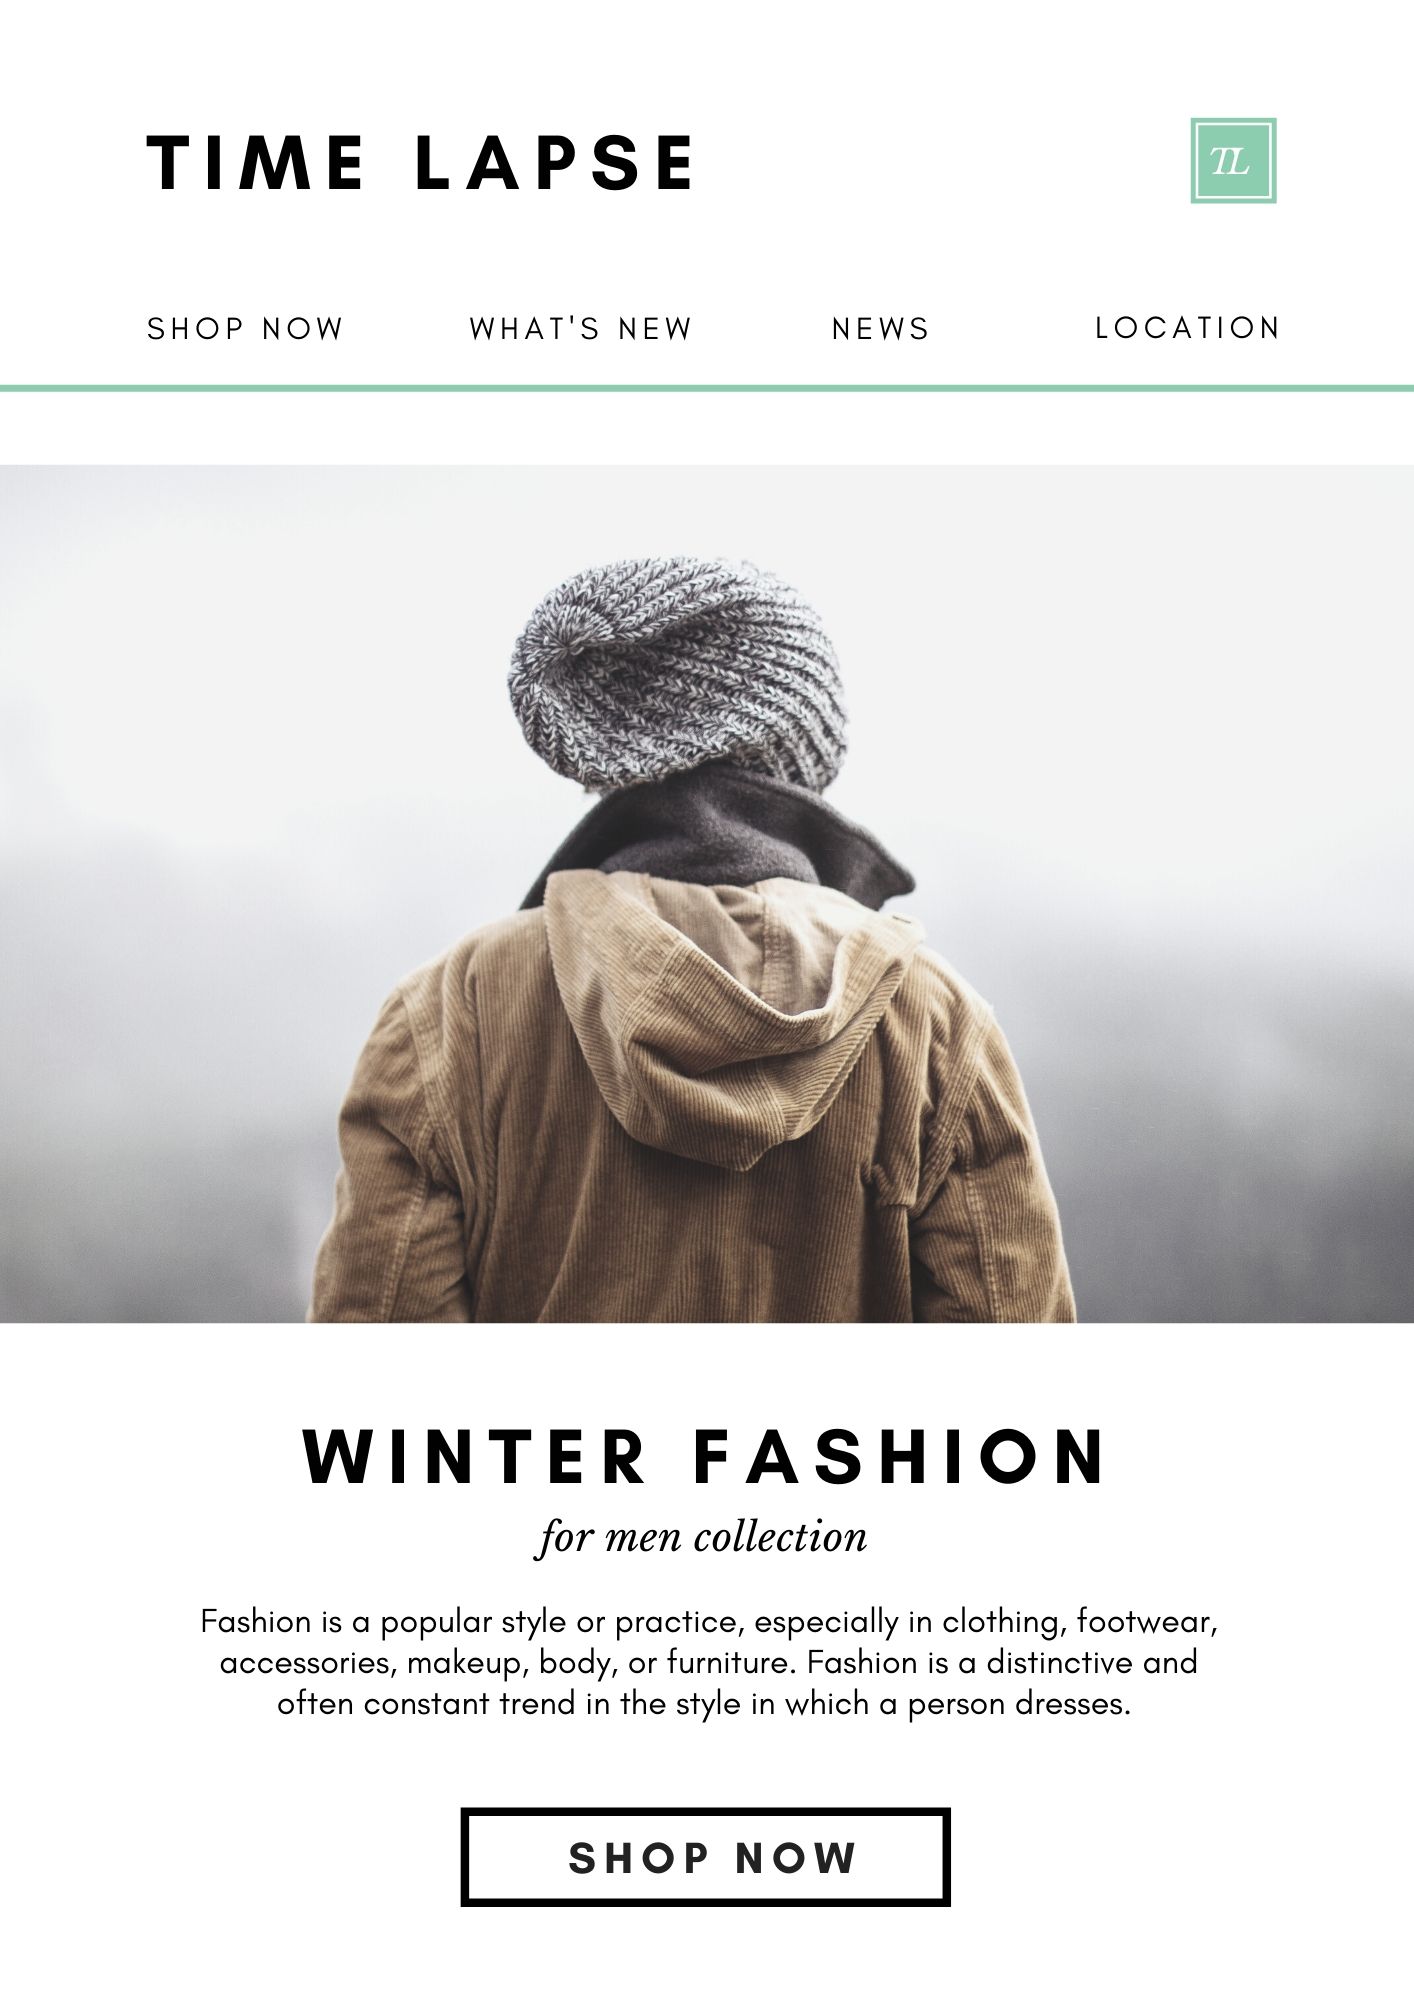 Winter Fashion is the email template showing with a Shop Now Button